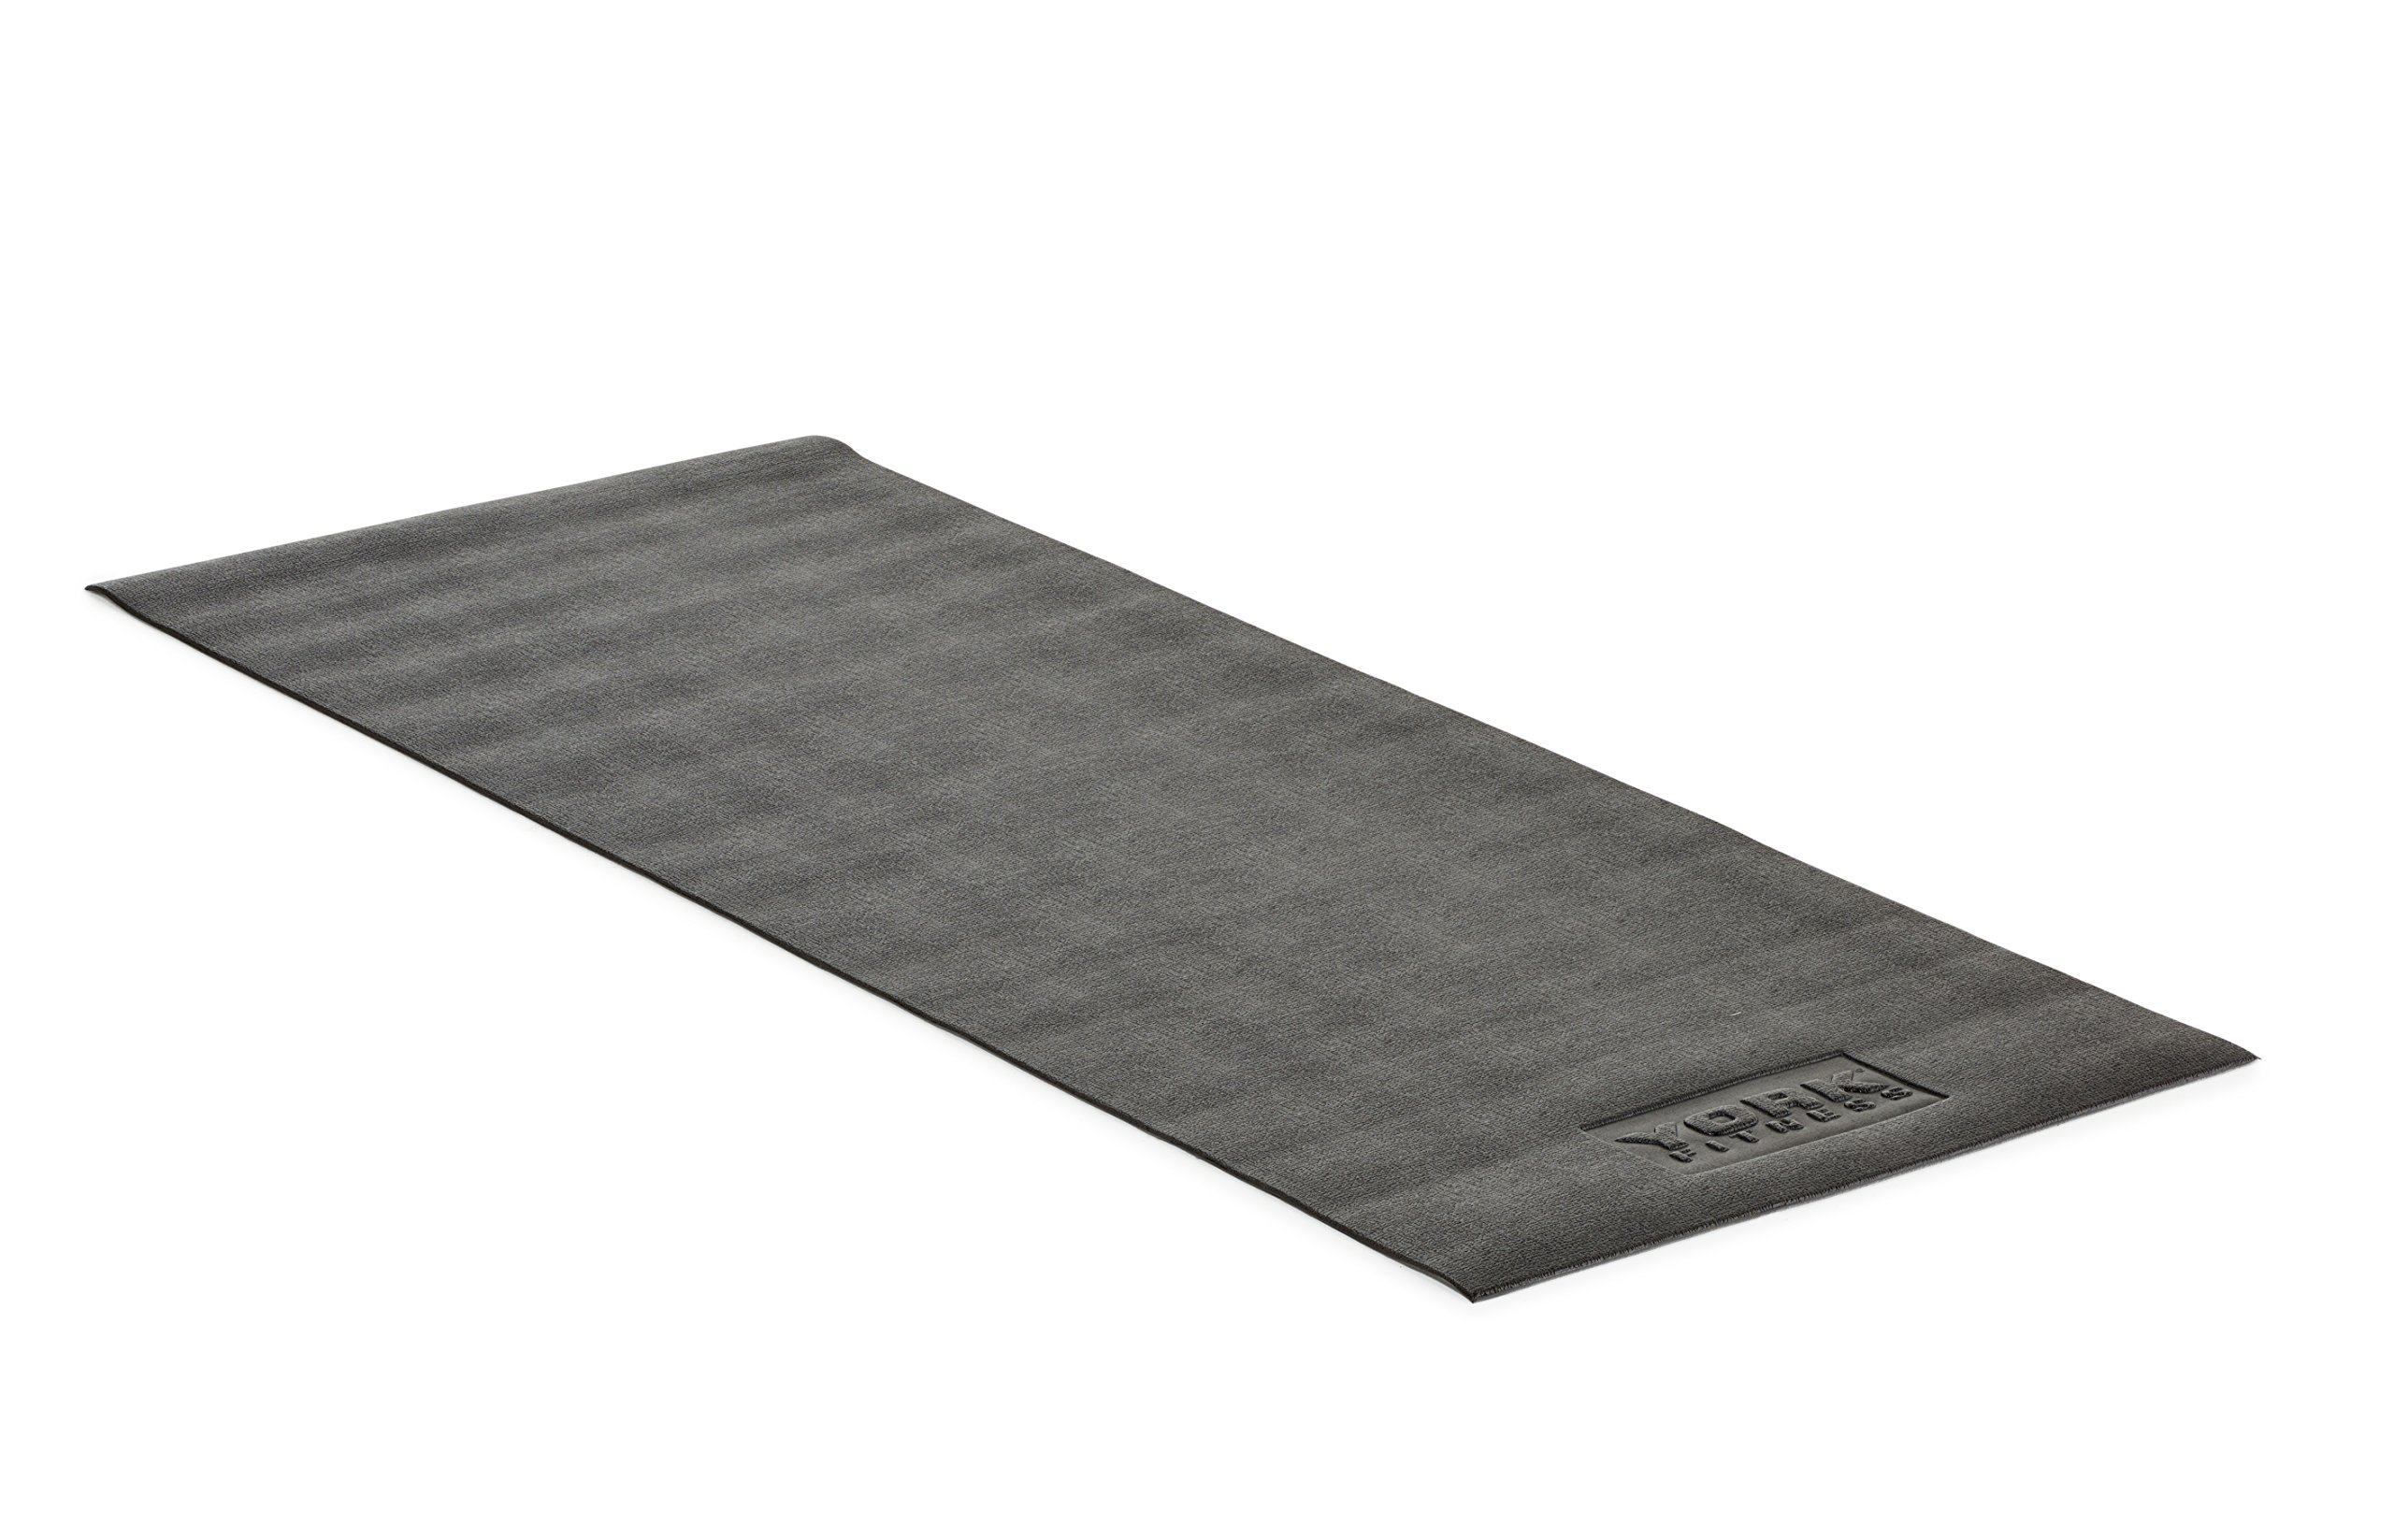 York Fitness Equipment and Exercise Mat - Non-slip Rubber Gymnastic mats,Exercise Camping Mats – For Yoga, Treadmills, Benches, Cycles, Rowers and Cross Trainers – Large – 182cm/76cm